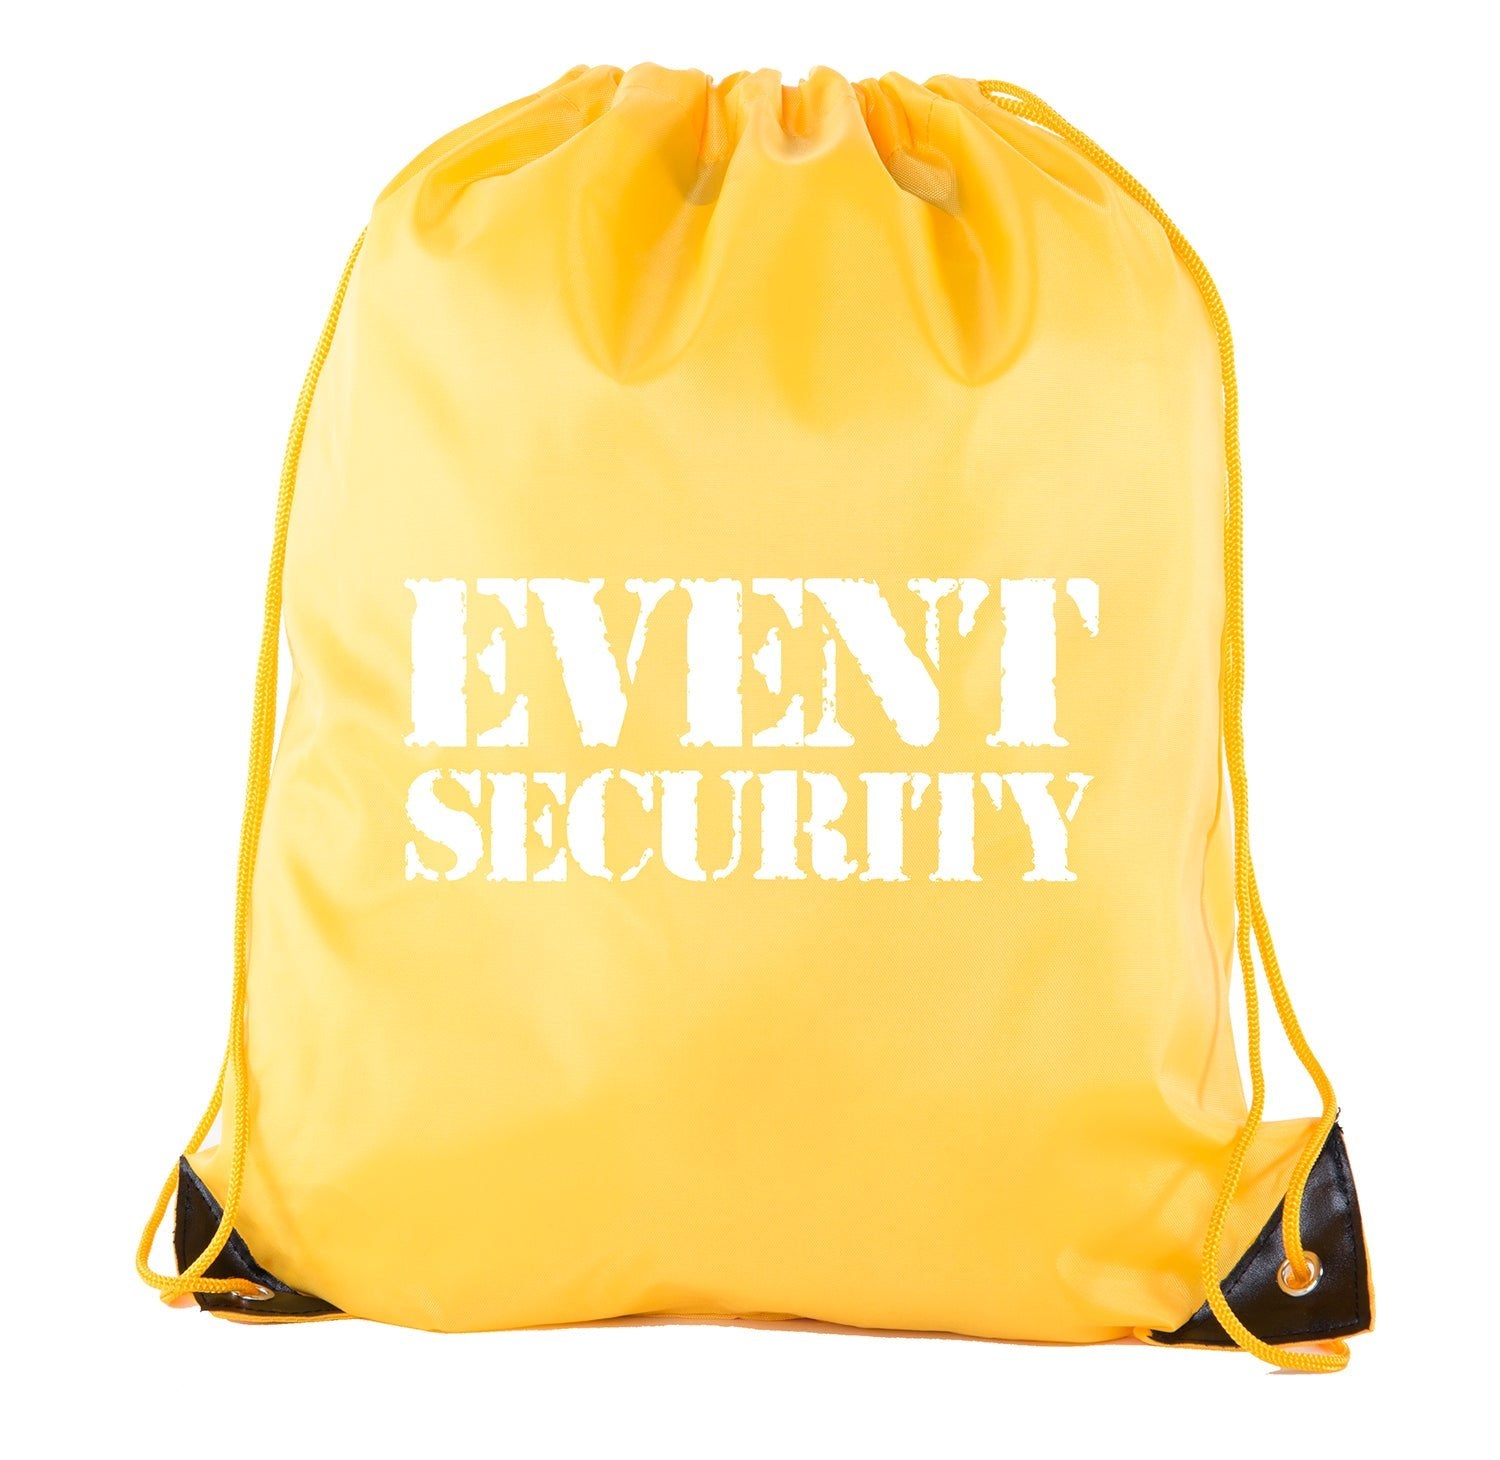 Event Security - Rough Text - Polyester Drawstring Bag - Mato & Hash